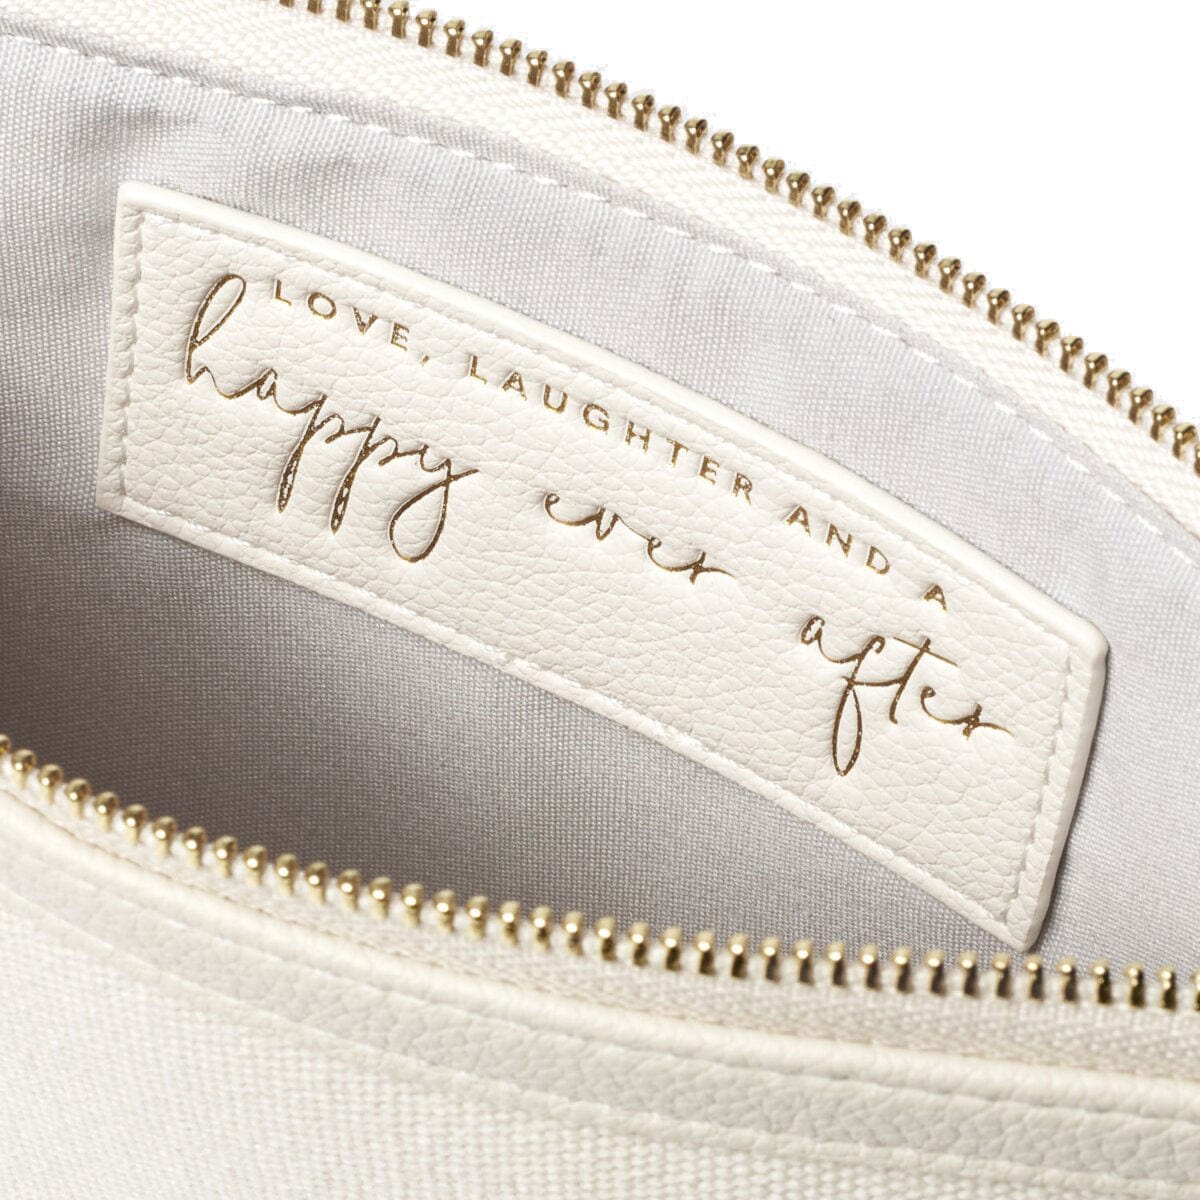 Katie Loxton Secret Message Pouch Katie Loxton Bridal Canvas Secret Message Pouch - Love Laughter and a Happy Ever After - Off White